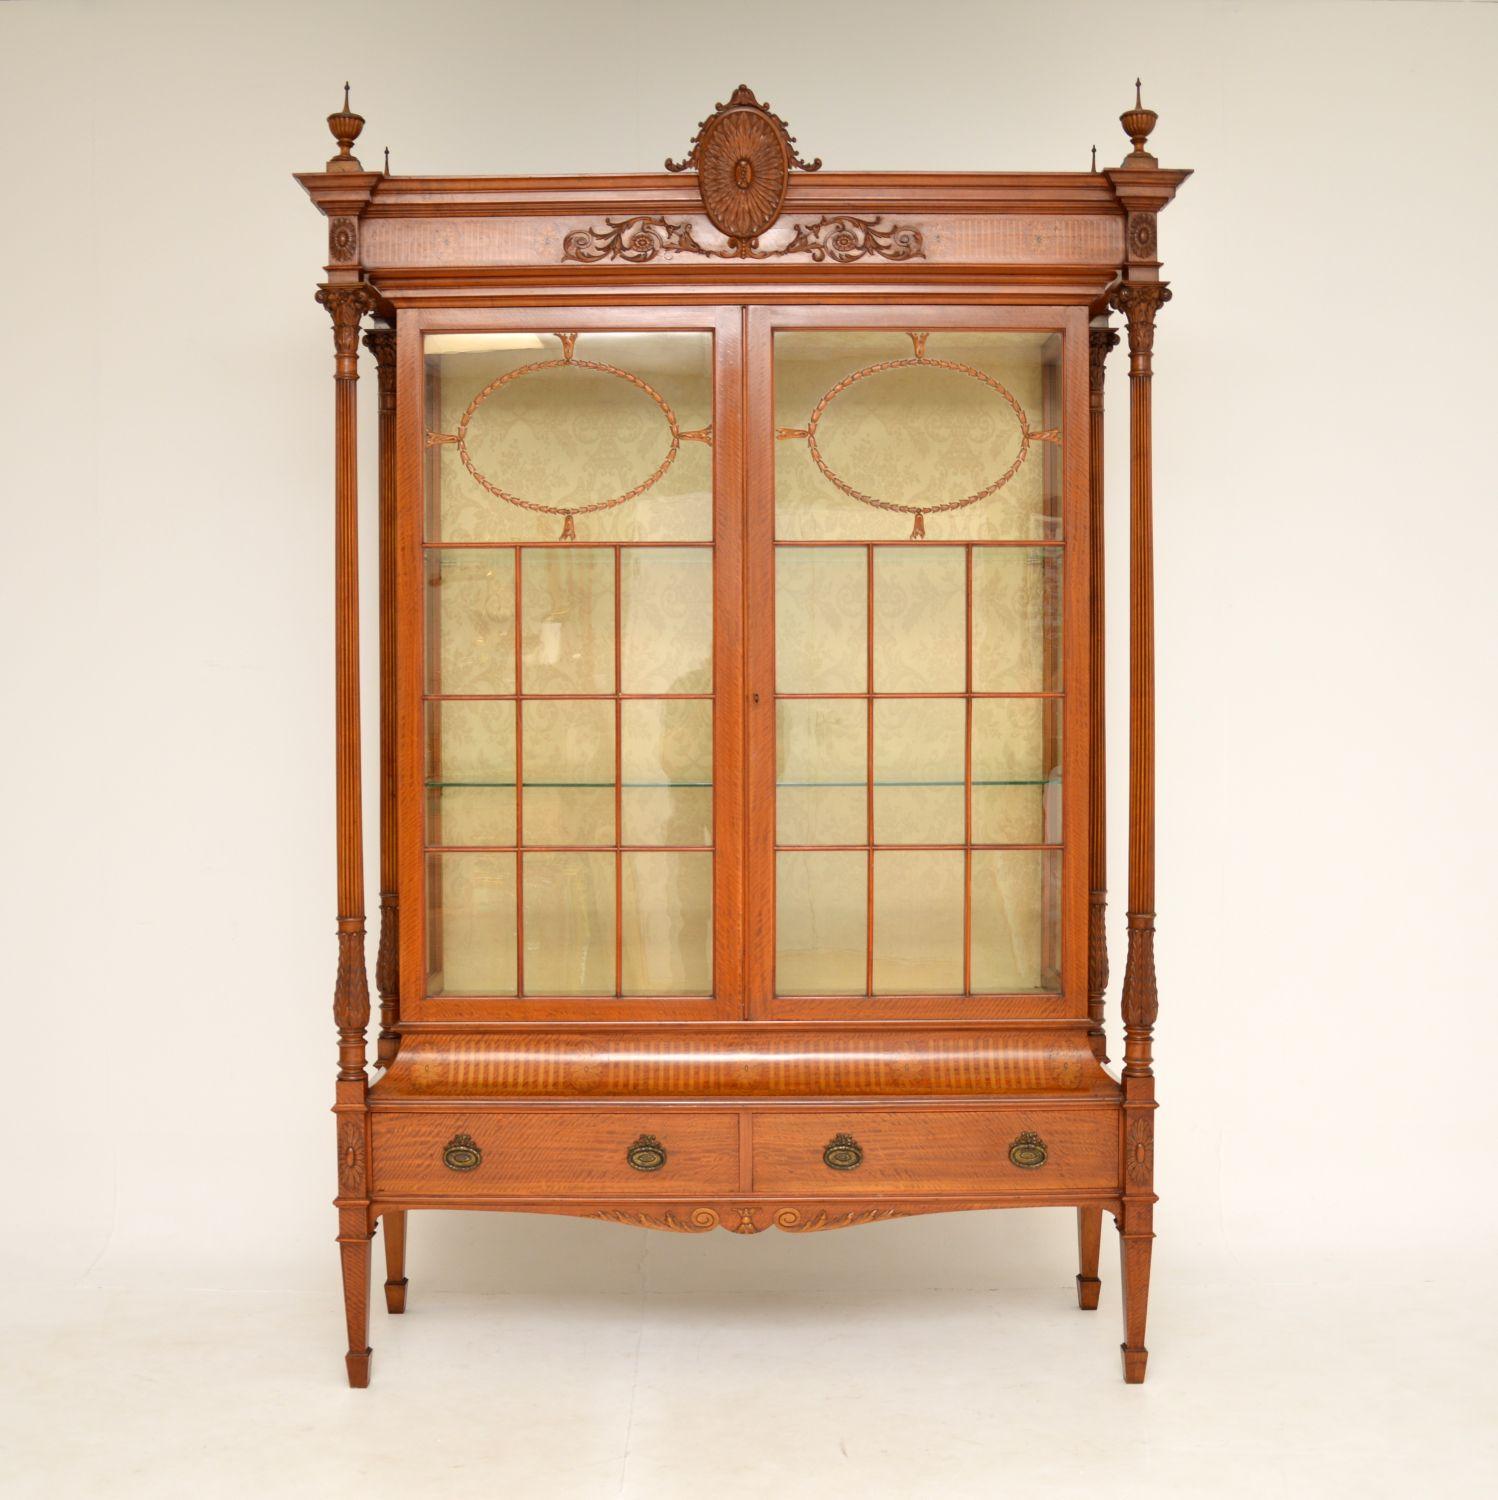 A magnificent and very rare antique Victorian satinwood display cabinet, beautifully made from inlaid satinwood. This was made in England, it dates from around the 1880-1890 period.

The quality is exceptional, one of the absolute best we have ever